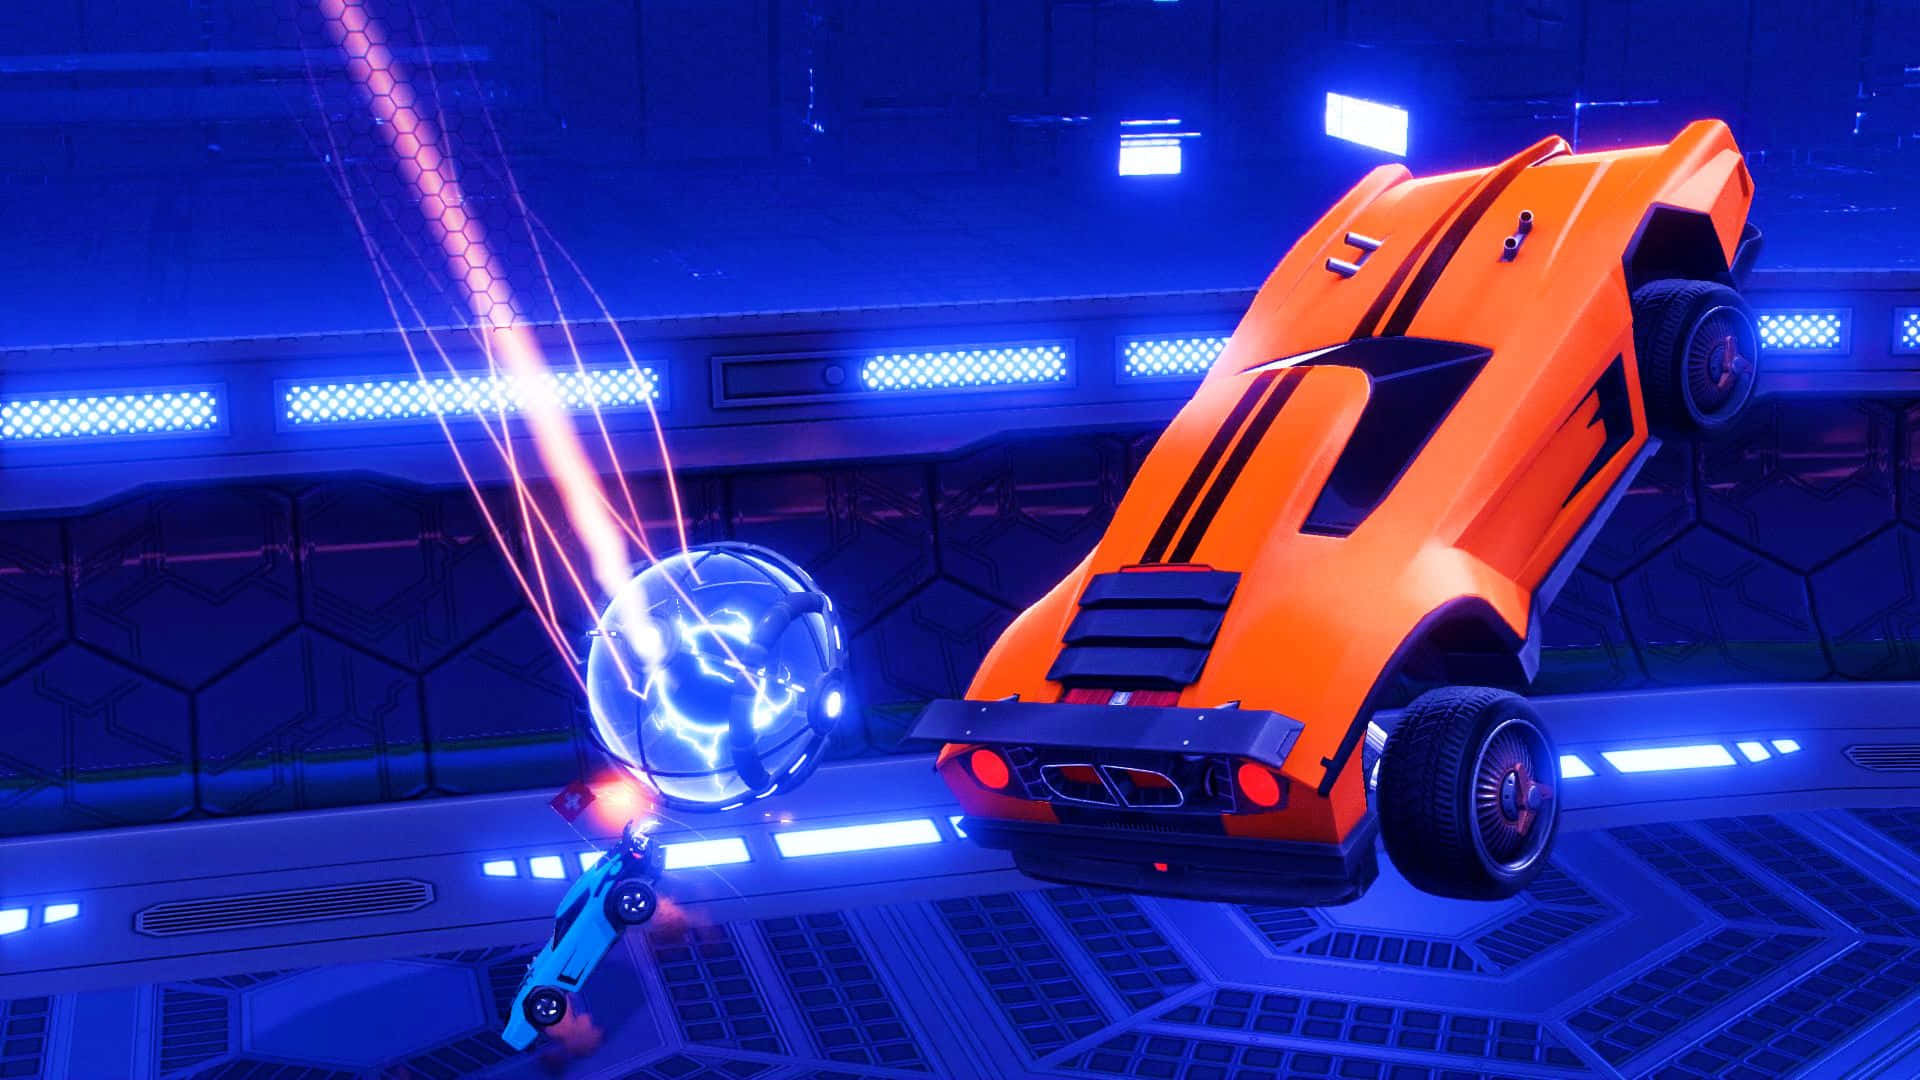 Enjoy the beauty and excitement of Fast-Paced Rocket League Action